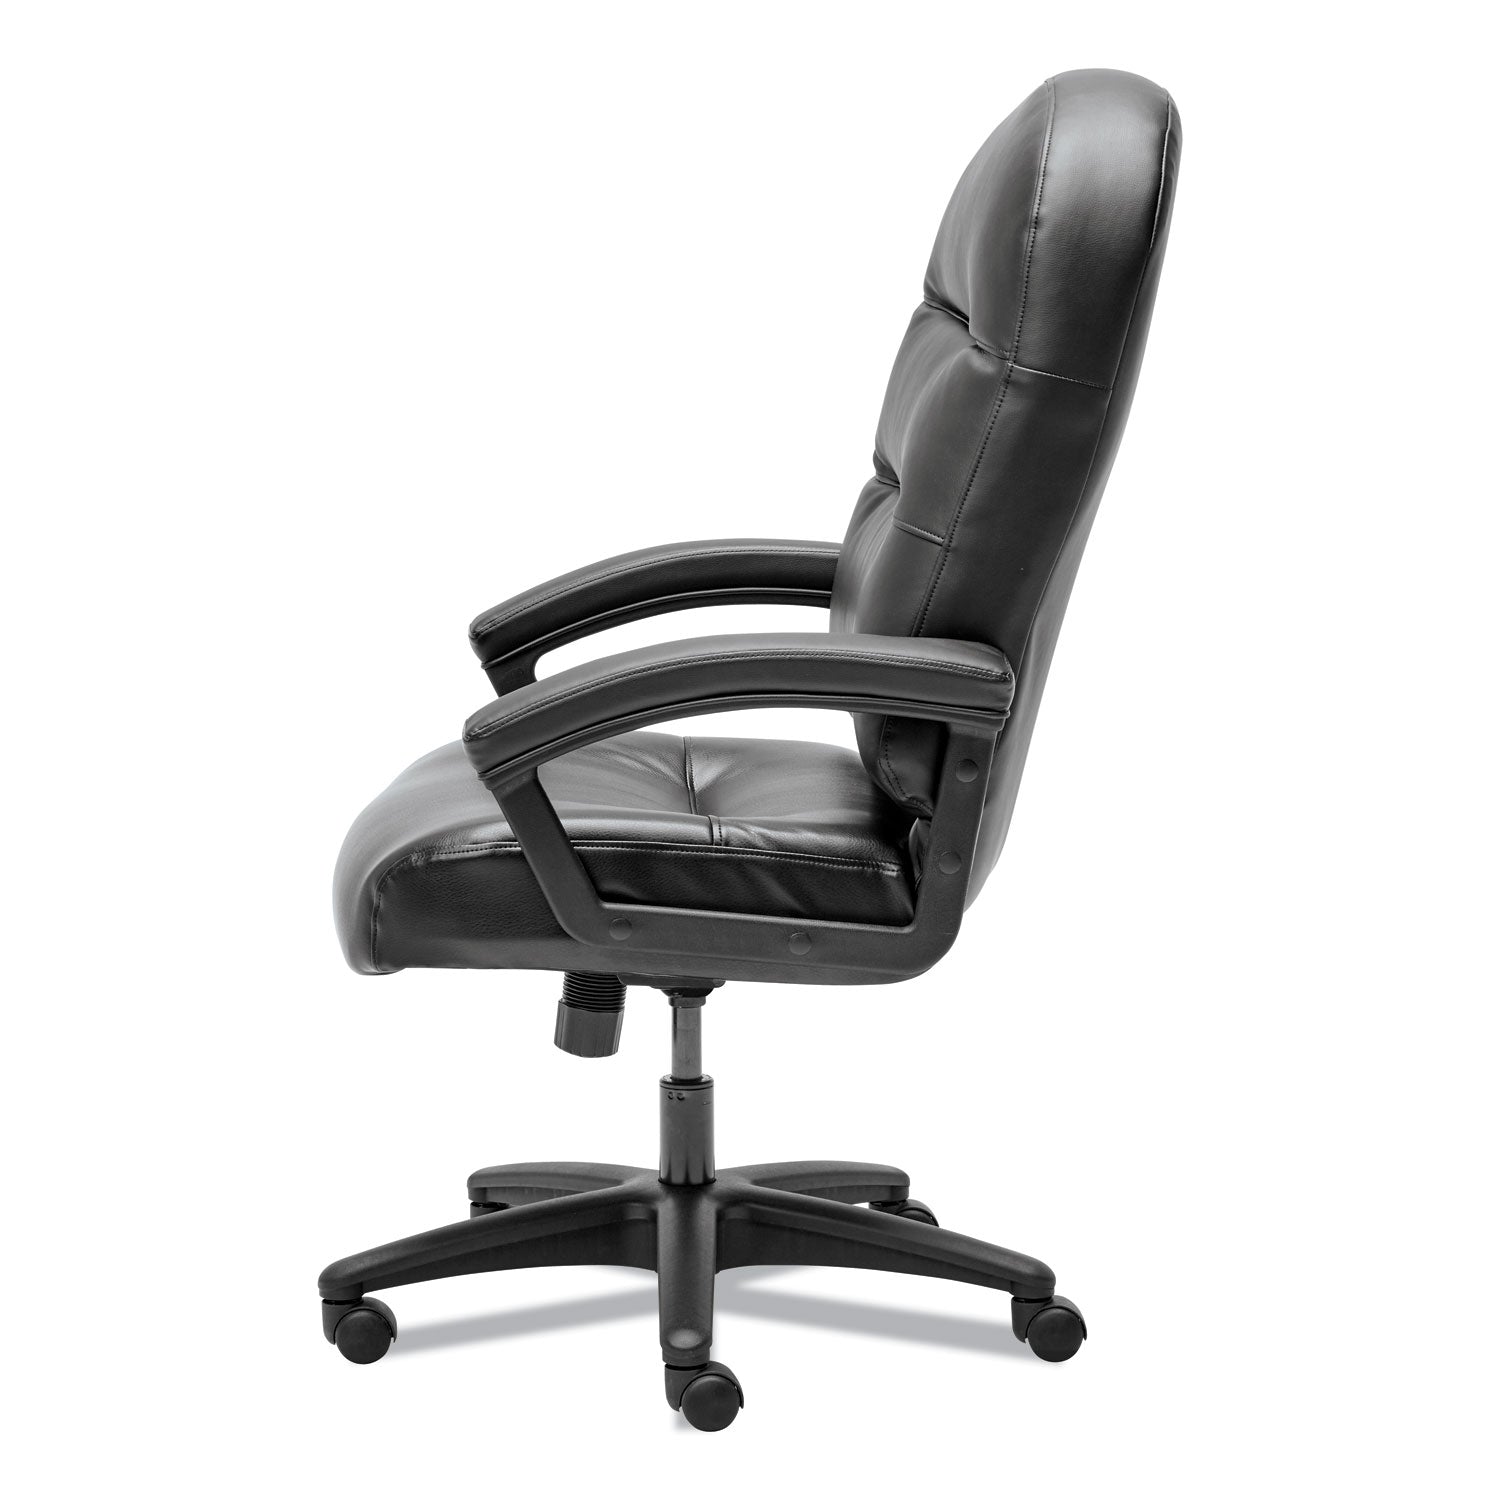 pillow-soft-2090-series-executive-high-back-swivel-tilt-chair-supports-up-to-250-lb-16-to-21-seat-height-black_hon2095hpwst11t - 2